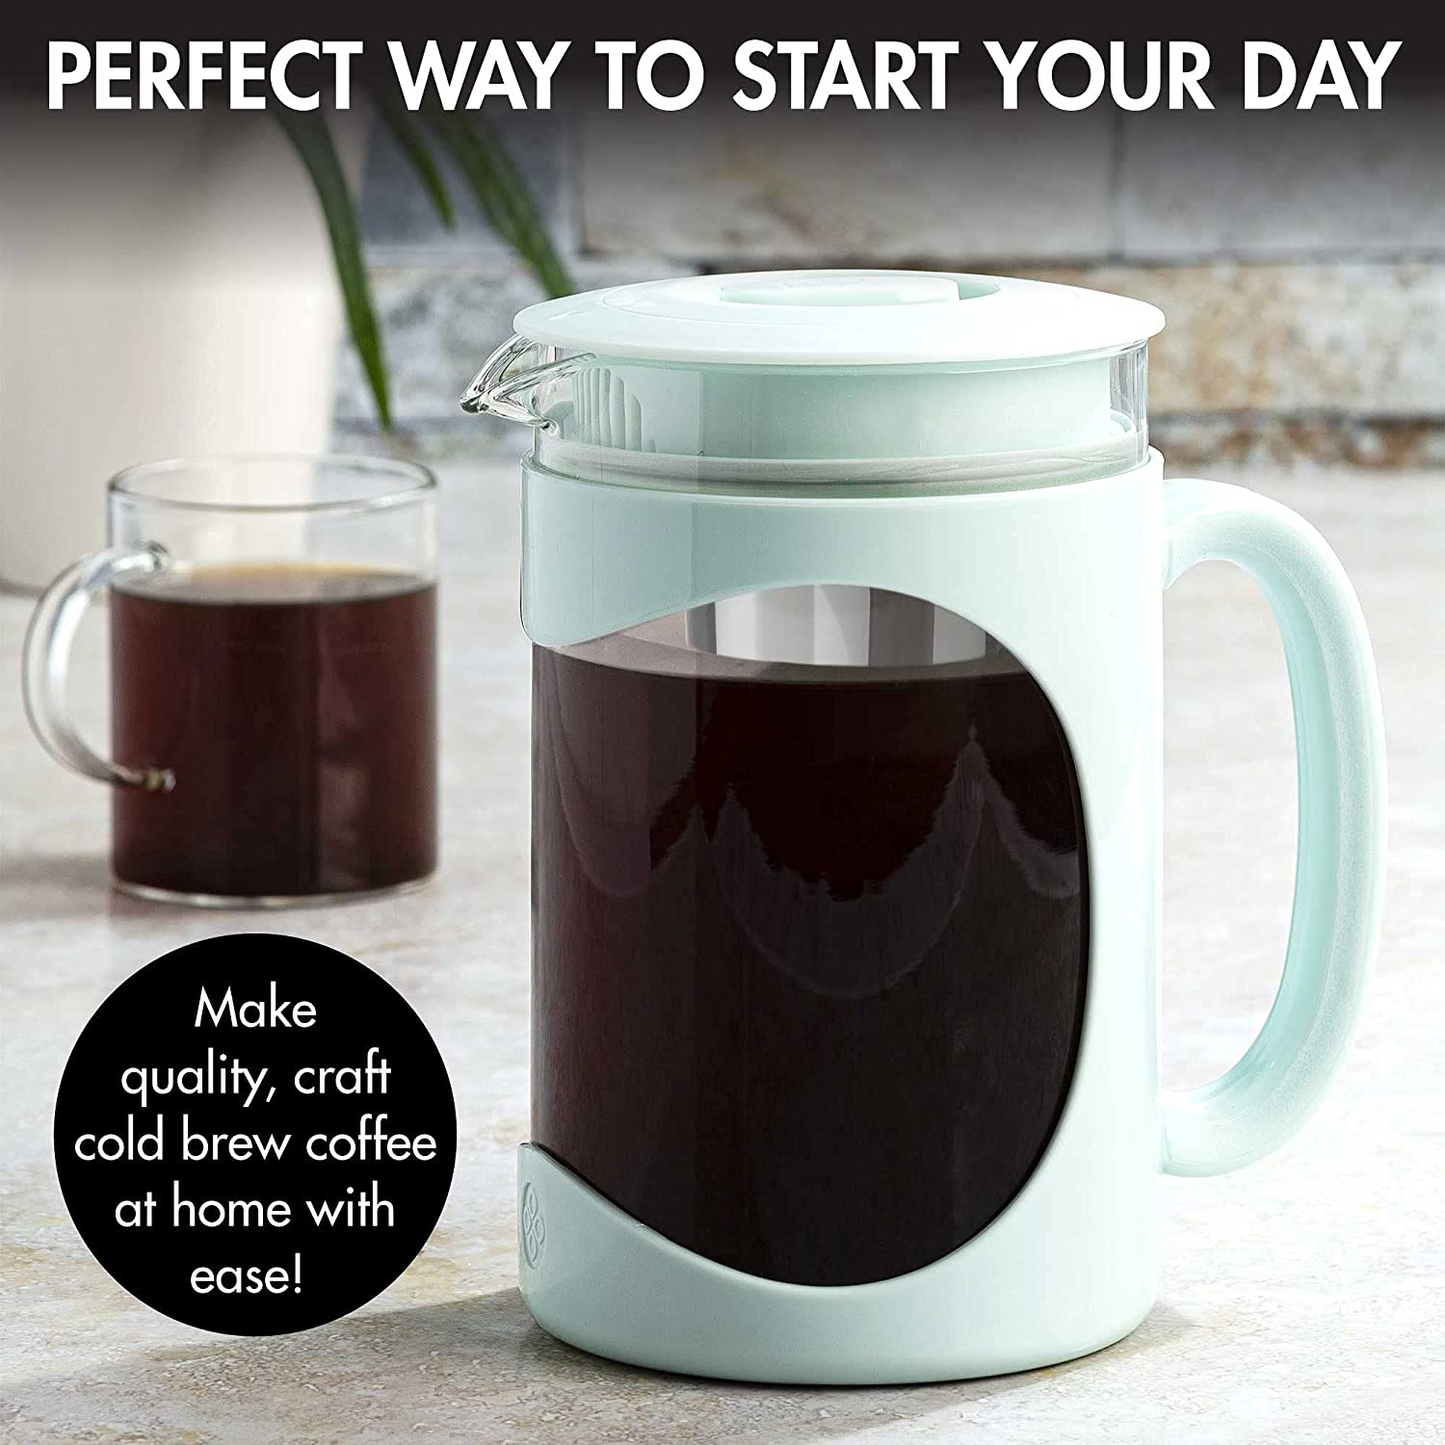 Primula Burke Deluxe Cold Brew Iced Coffee Maker, Comfort Grip Handle, Durable Glass Carafe, Removable Mesh Filter, Perfect 6 Cup Size, Dishwasher Safe, 1.6 Qt, White